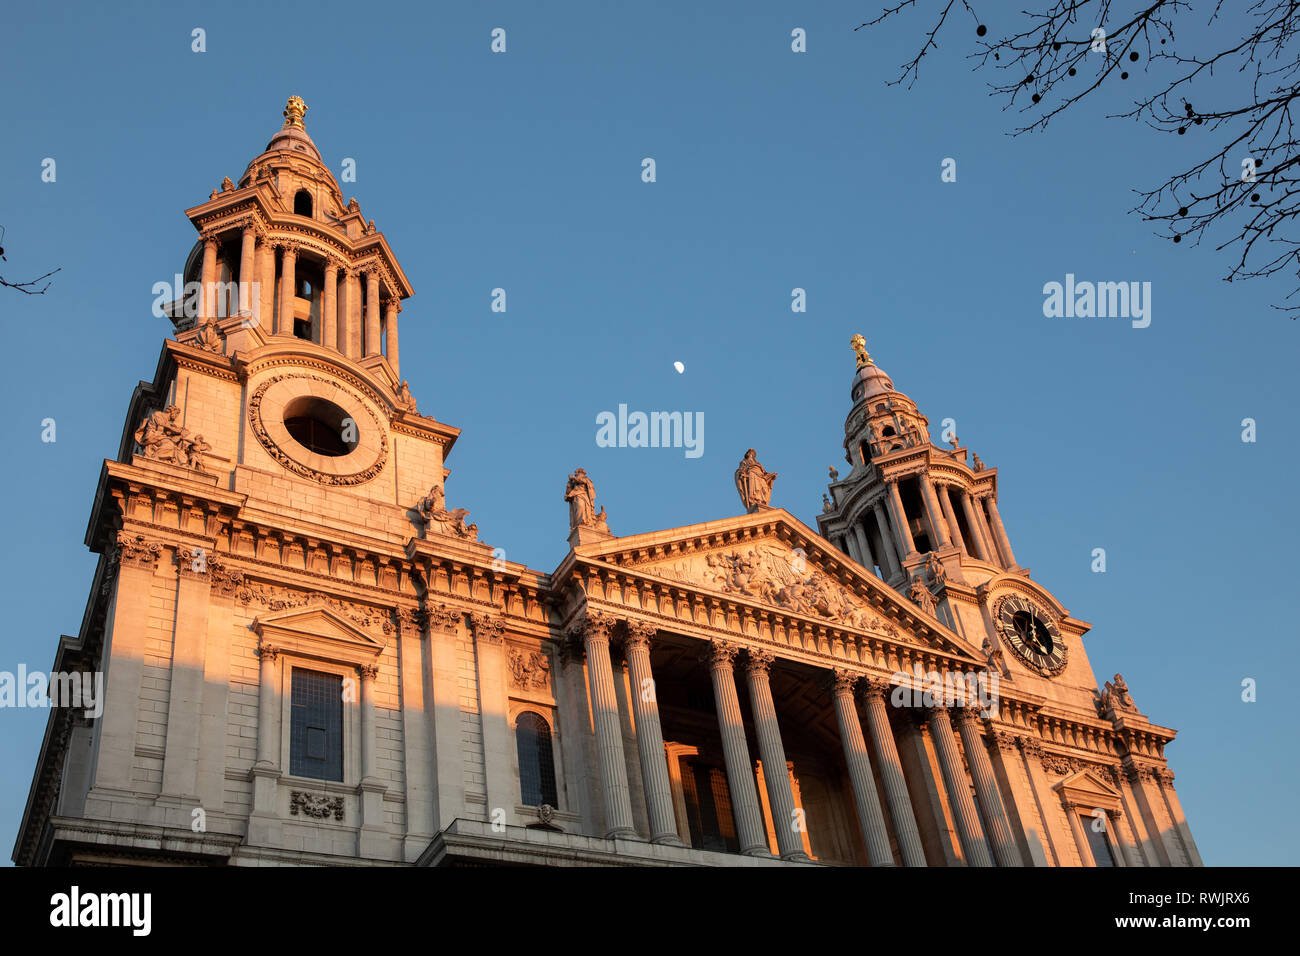 St Paul's Cathedral, London, UK Stockfoto